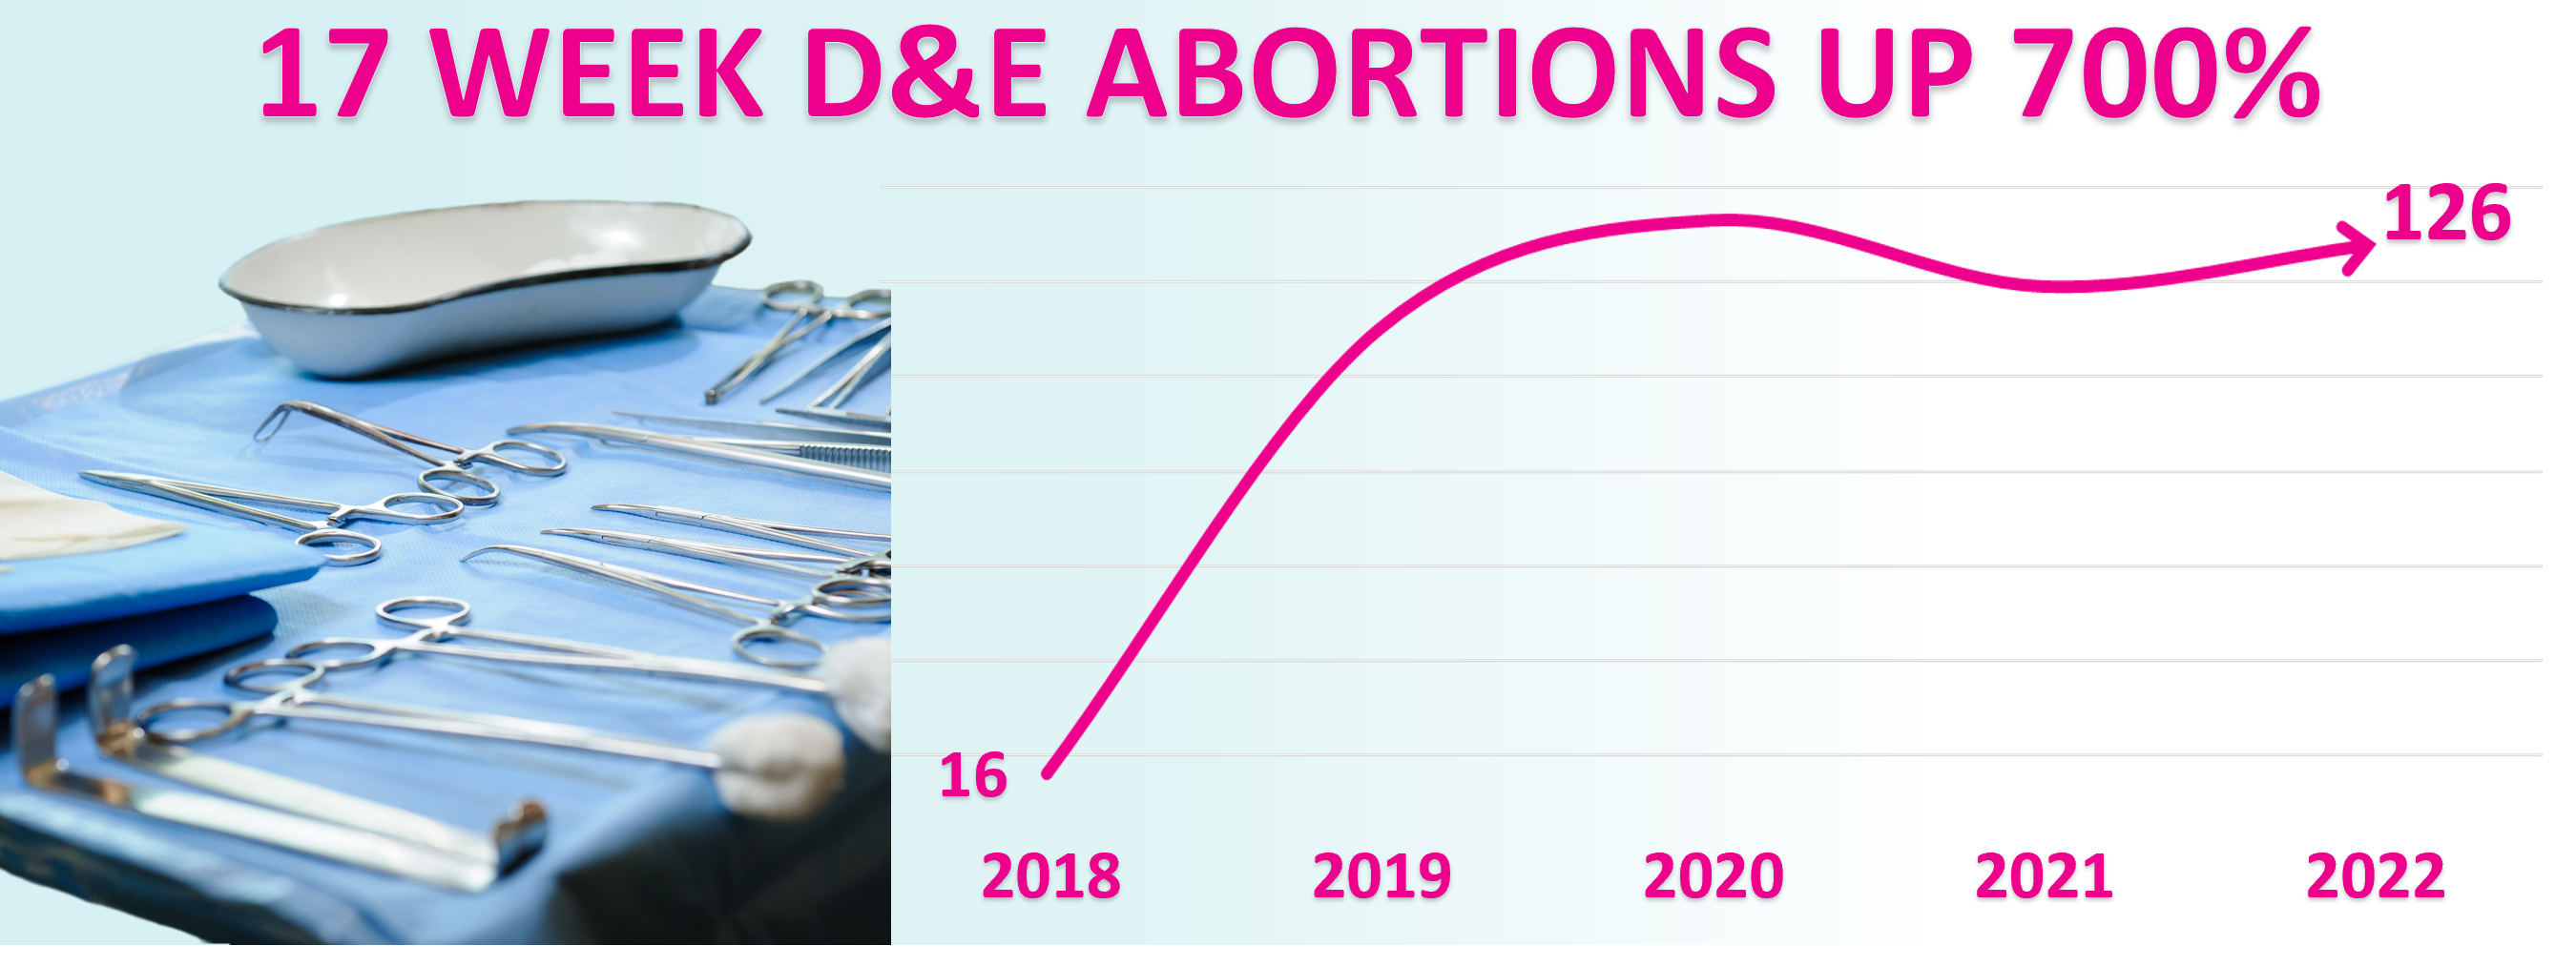 700% Increase in D&E Abortions over 5 years from 16 to 126 babies murdered in 2022.